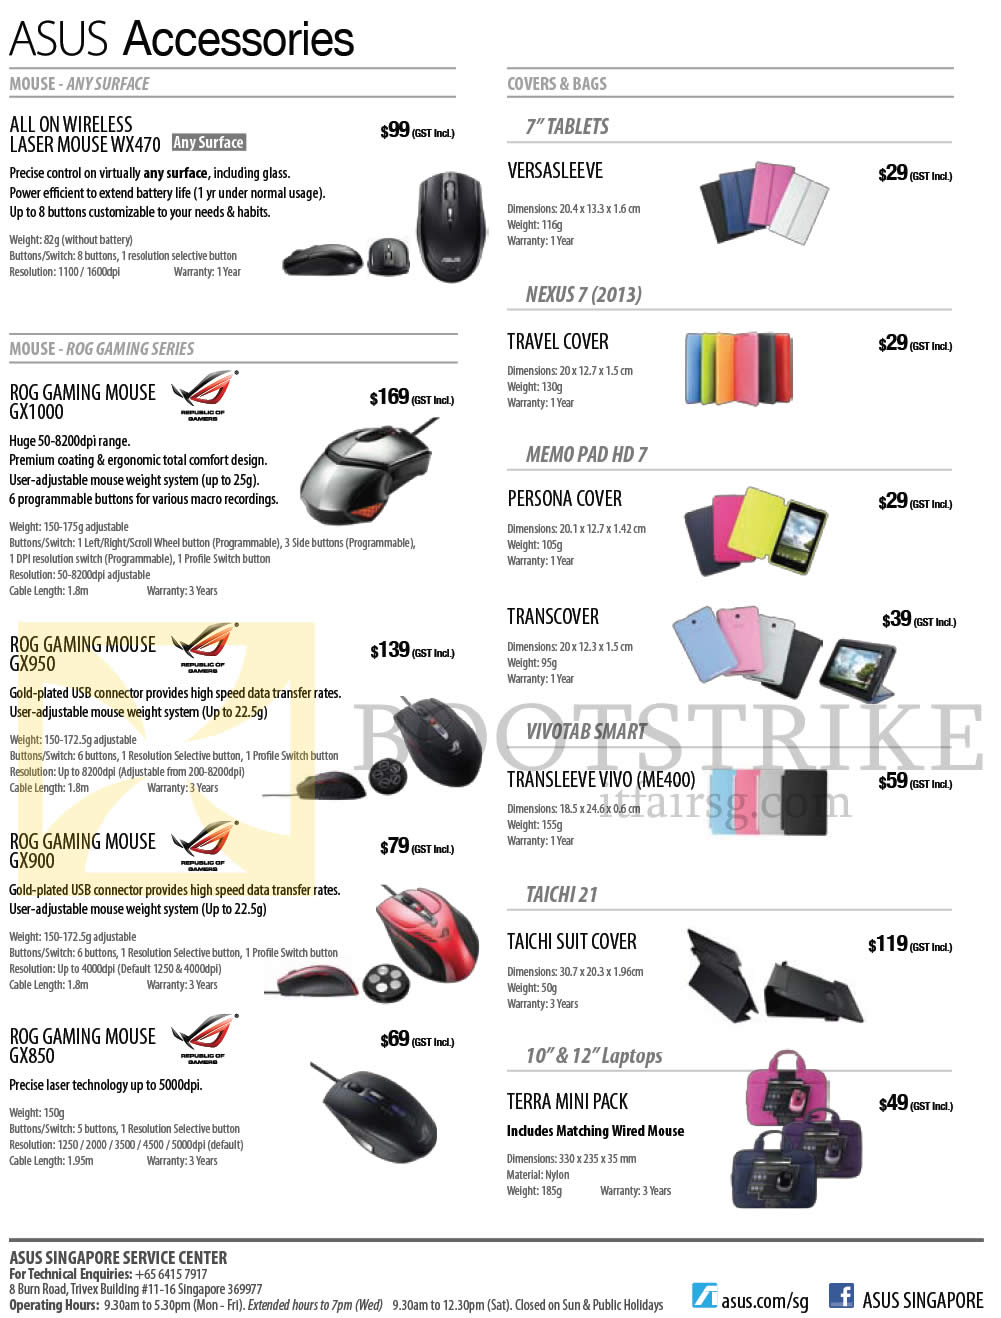 SITEX 2013 price list image brochure of ASUS Accessories Mouse, Wireless Laser Mouse WX470, GX1000, GX950, GX900, GX850